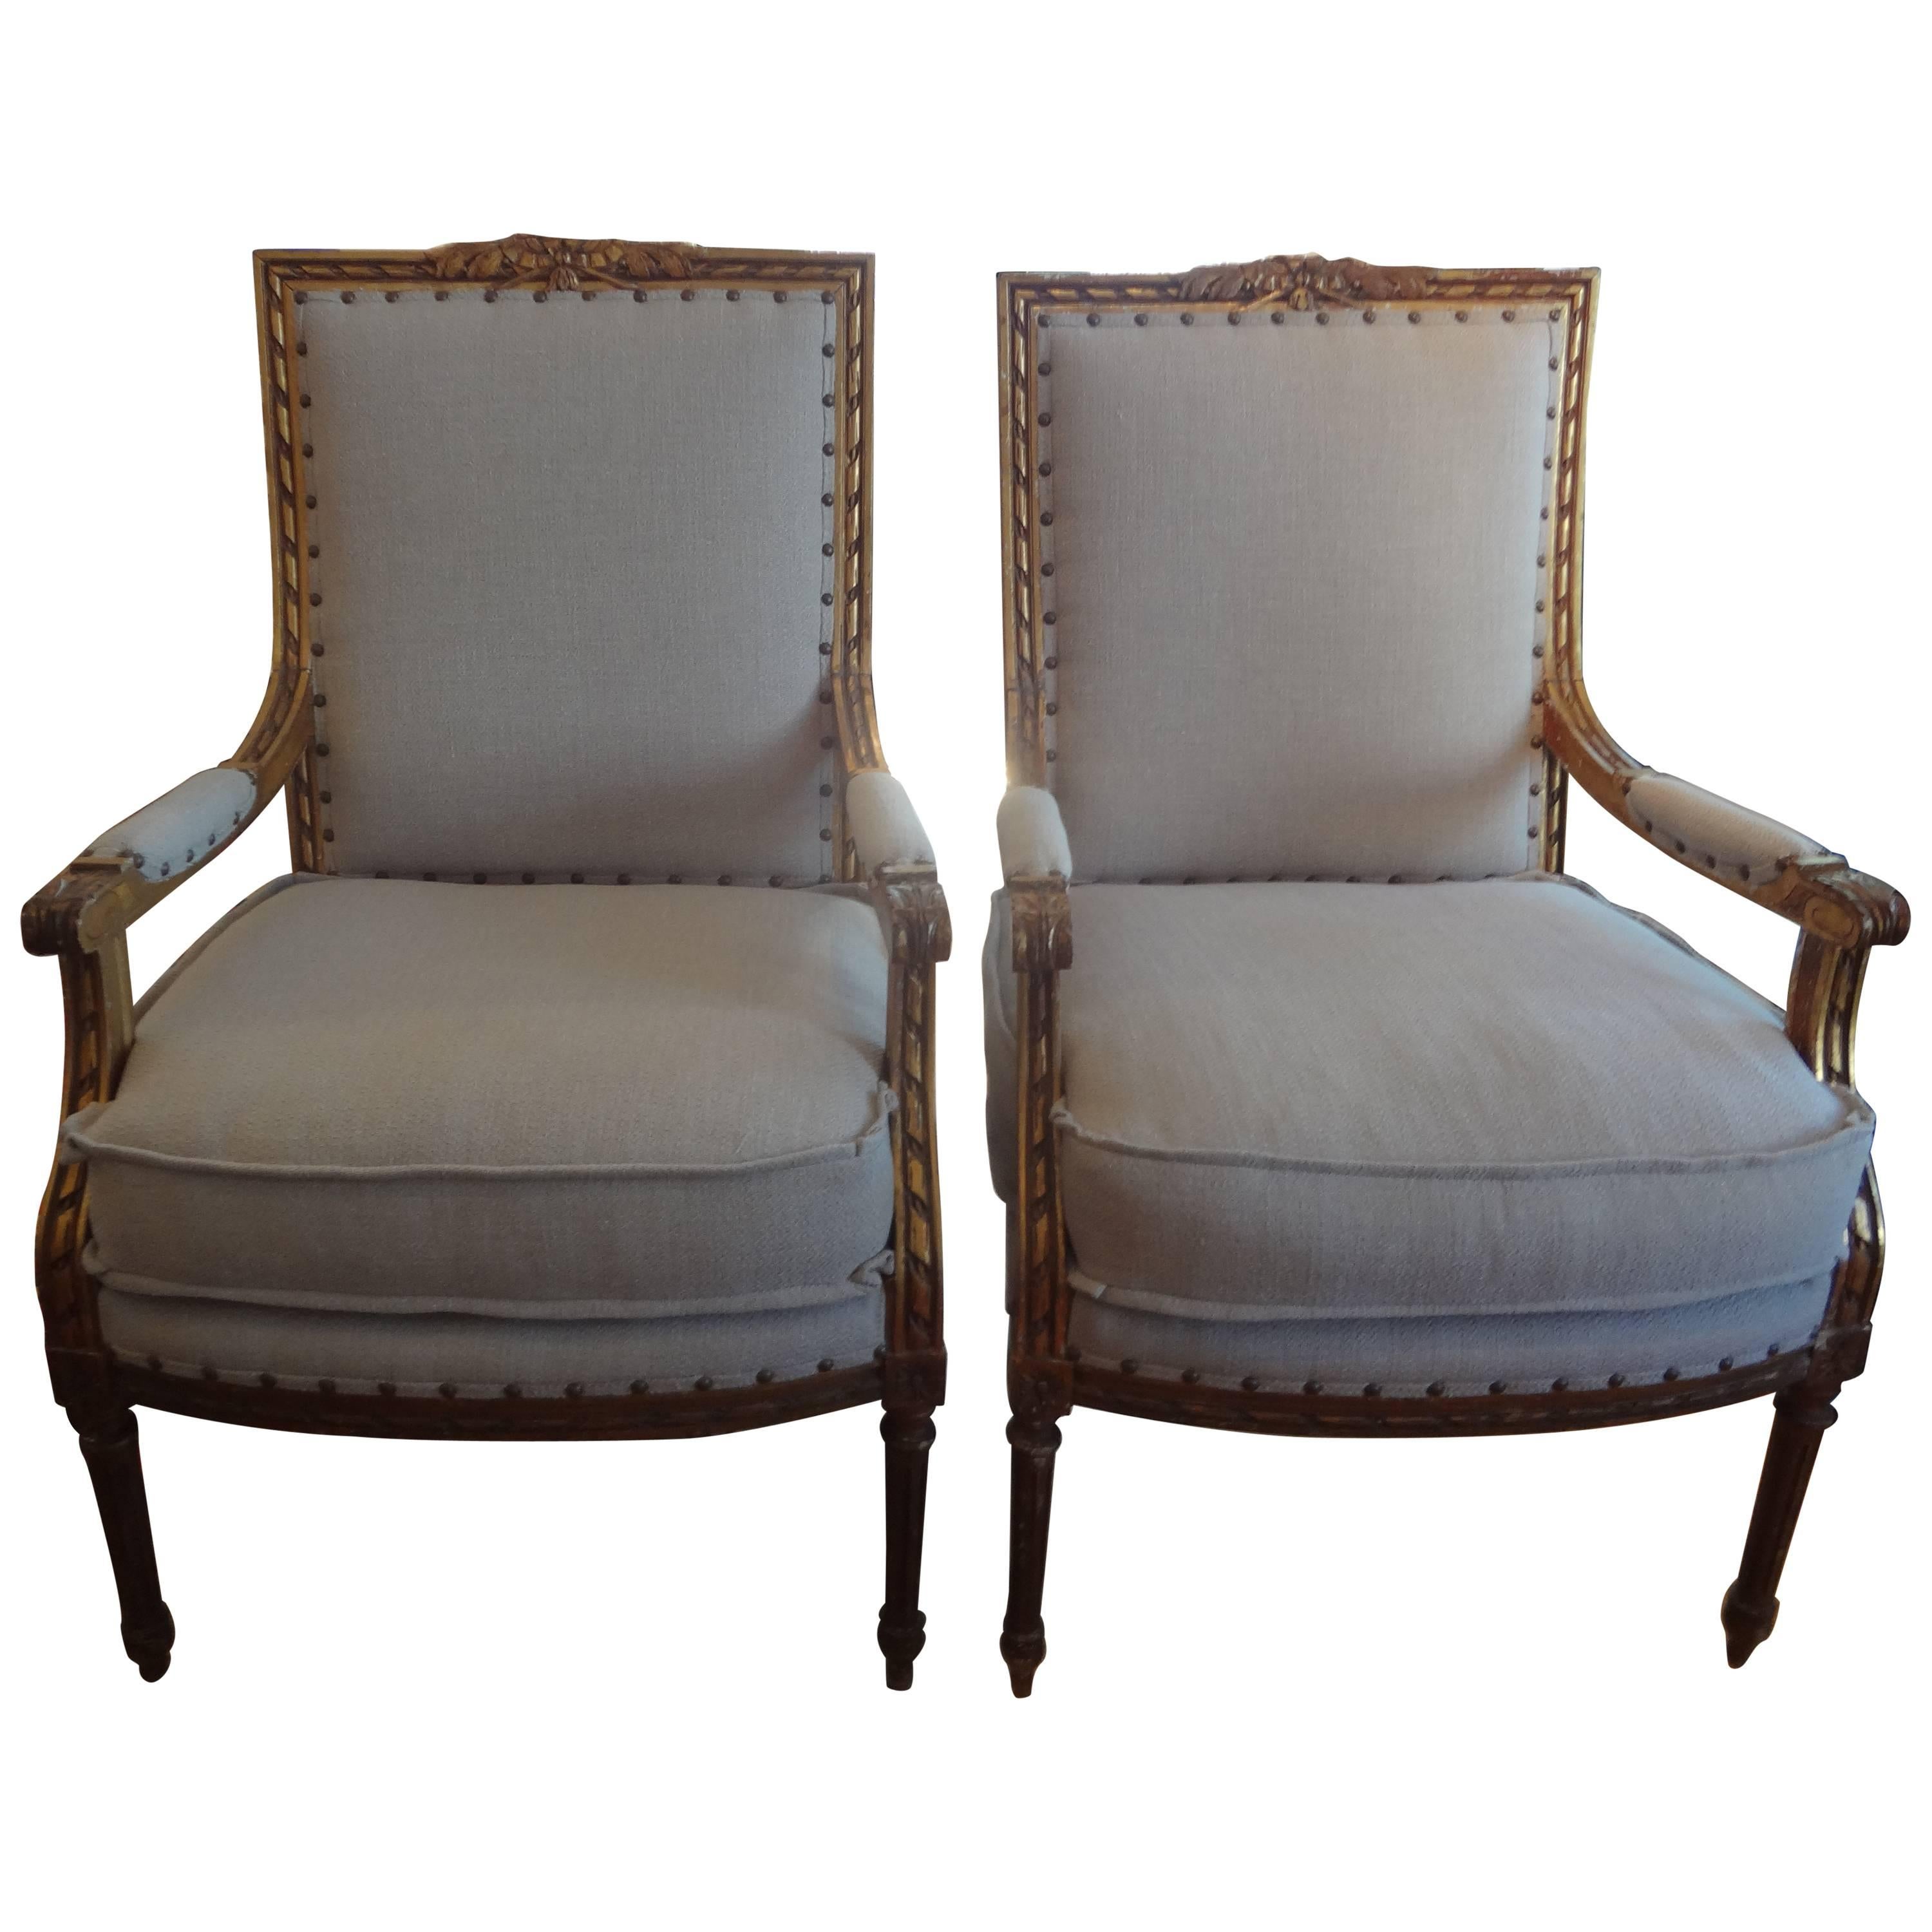 Pair Of Antique French Louis XVI Style Gilt Wood Armchairs